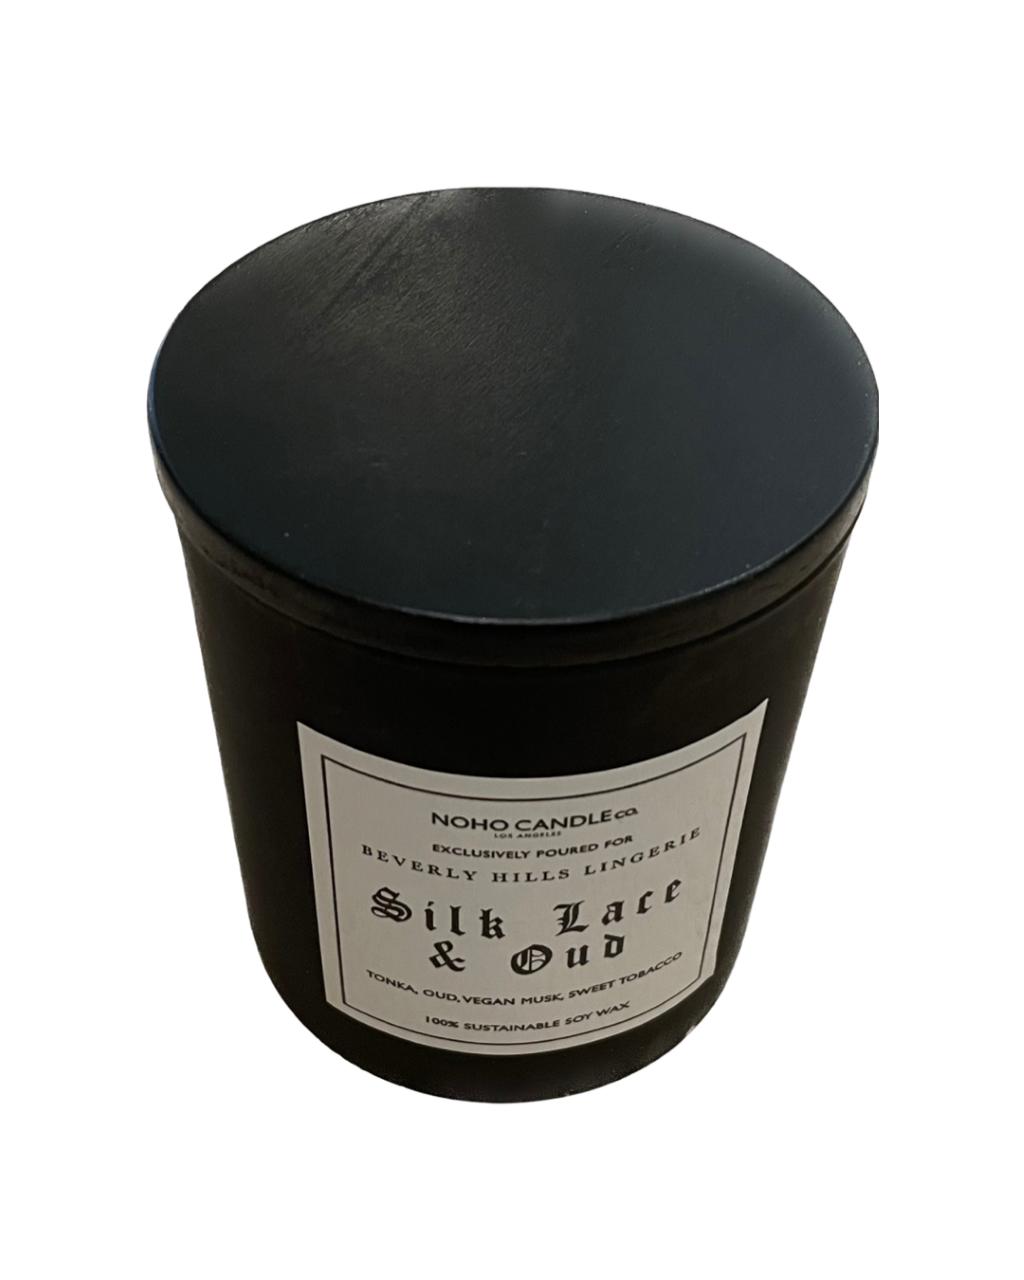 Silk Lace & Oud Handmade Sustainable Non-Toxic Candle